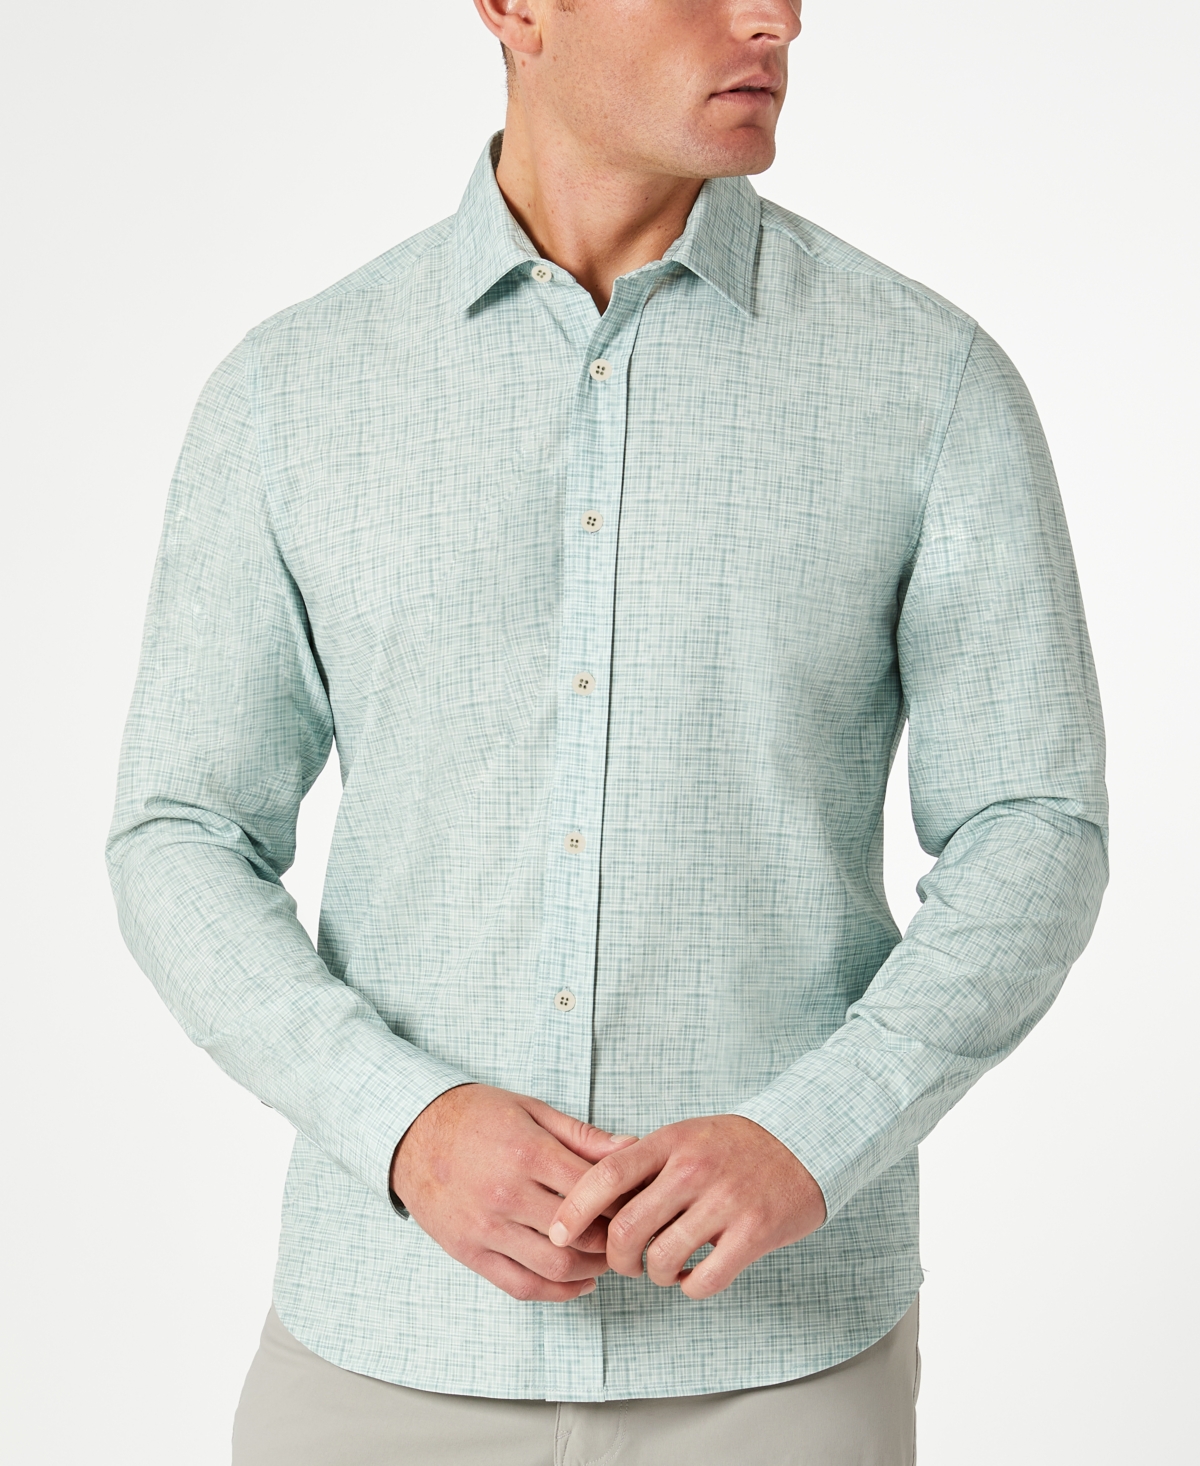 Kenneth Cole Men's Slim Fit Performance Shirt In Mint Plaid